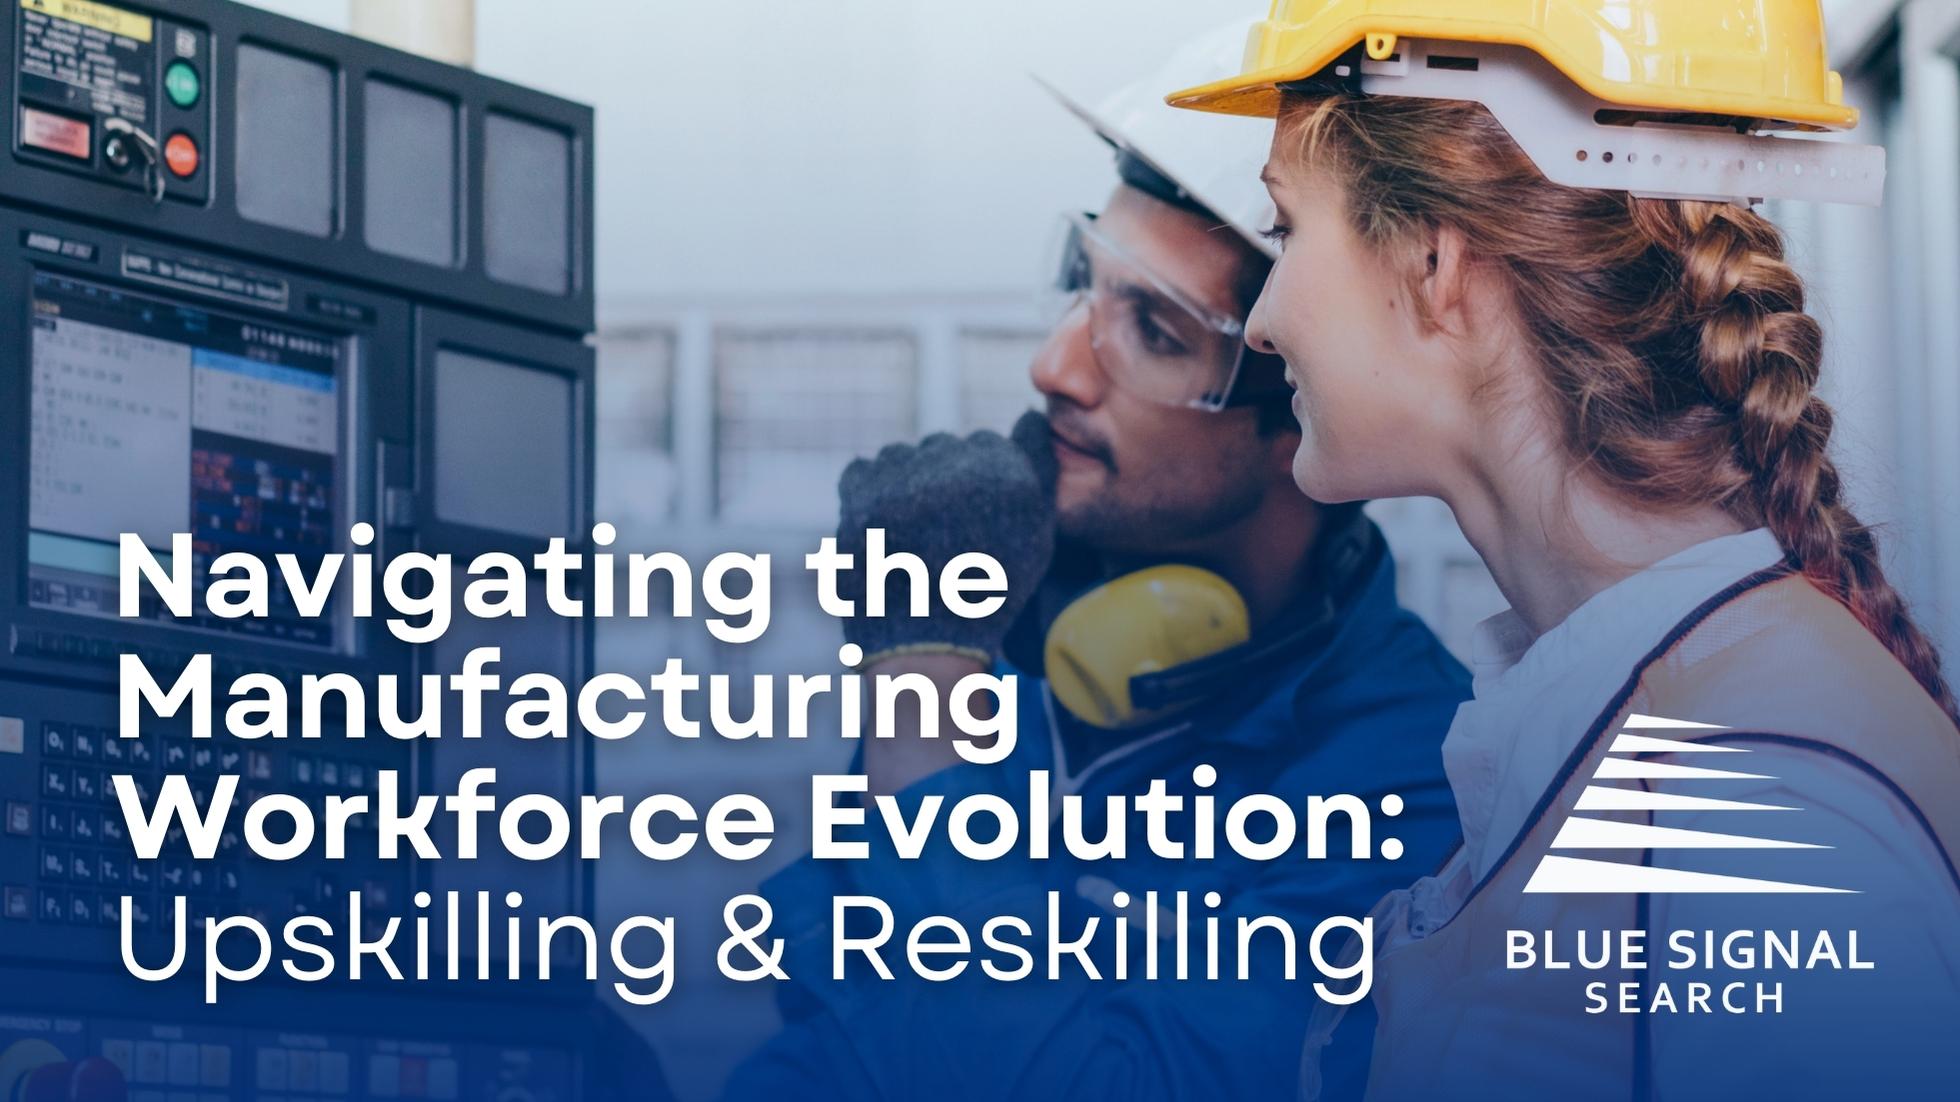 Man and woman in the manufacturing industry training, with the blog title "Navigating the Manufacturing Workforce Evolution: Upskilling & Reskilling" by Blue Signal Search displayed over a blue gradient on the image.